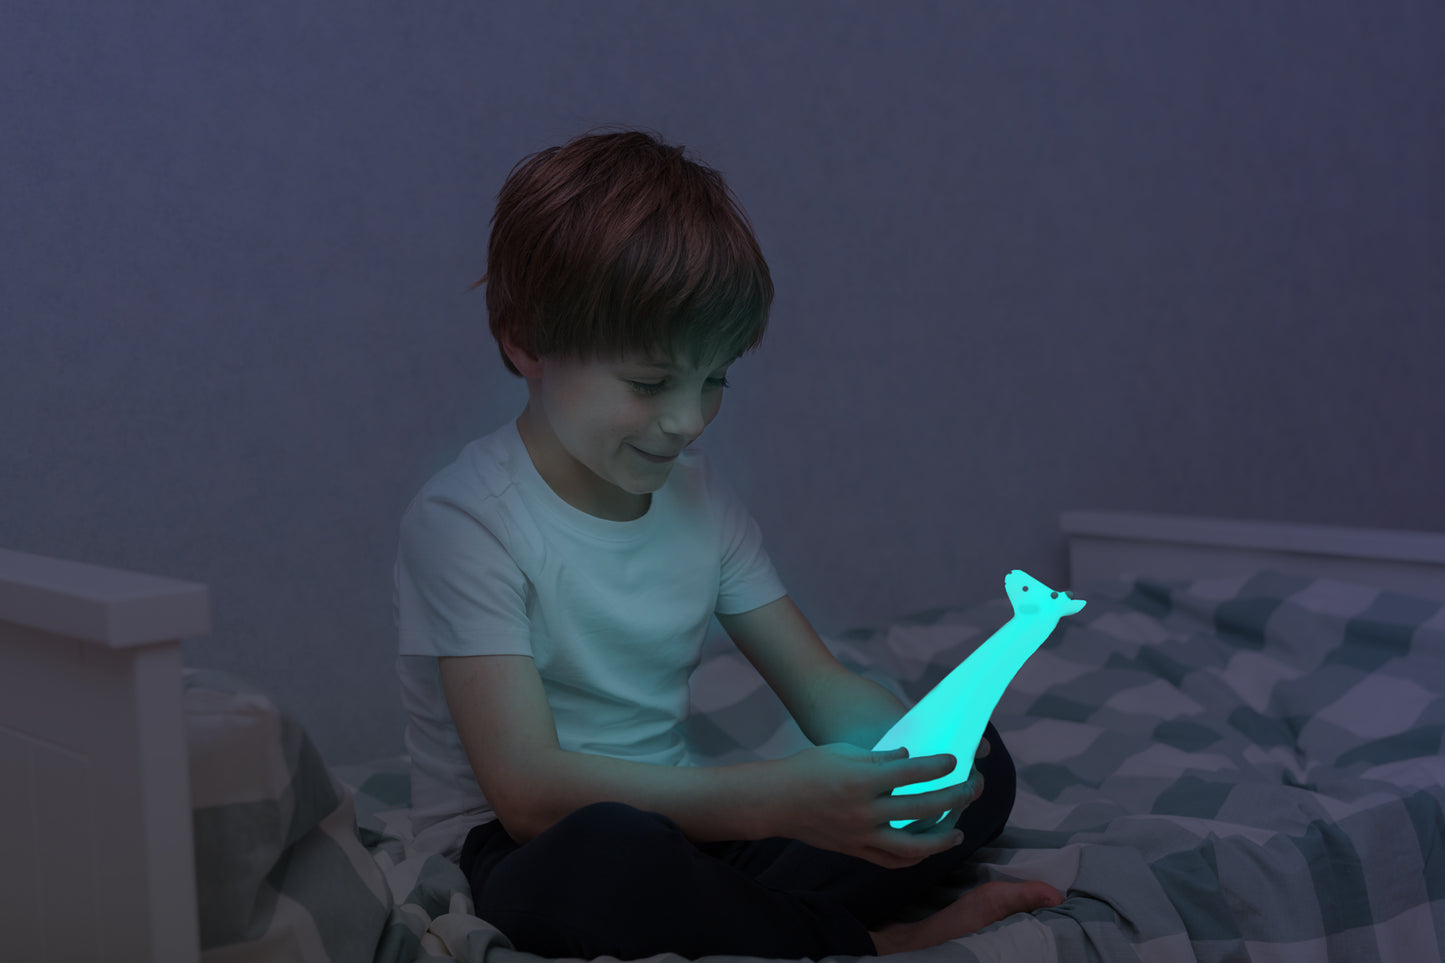 [Zazu] Gina the Giraffe, Rechargeable Torch with 7 Colors Night Light